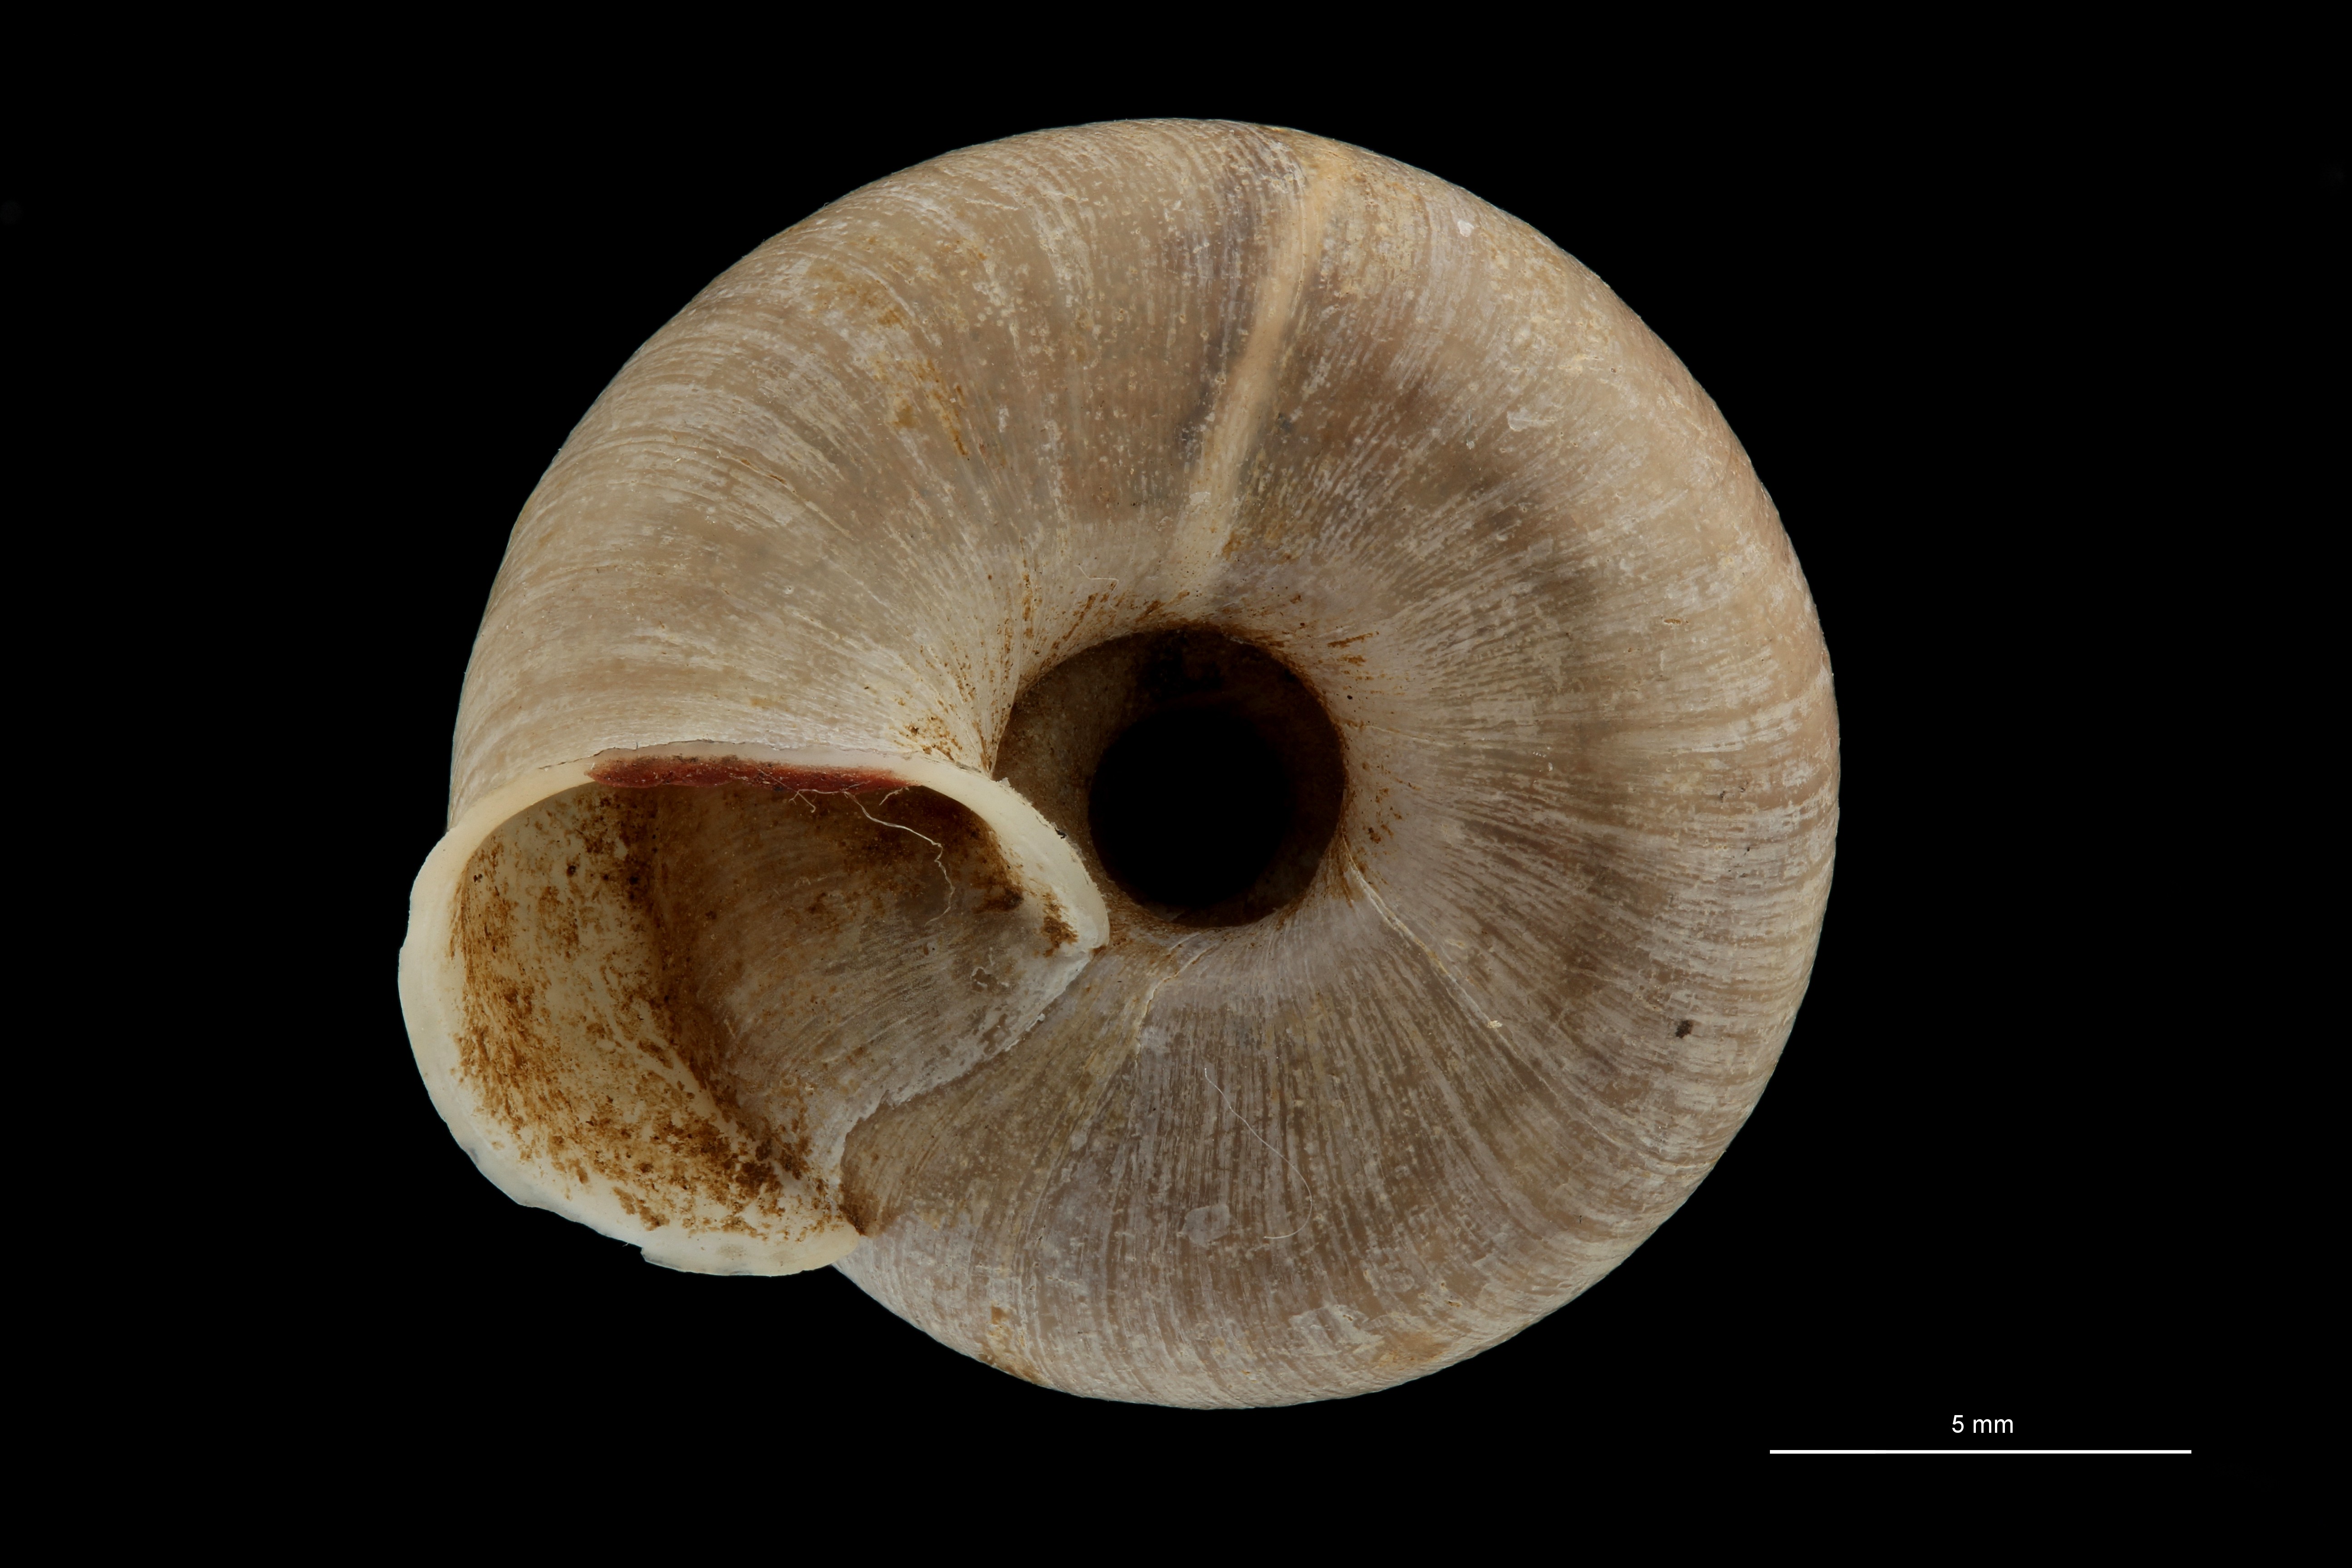 BE-RBINS-INV TYPE MT 718 Helix (Plectotropis) gitaena VENTRAL ZS PMax Scaled.jpg